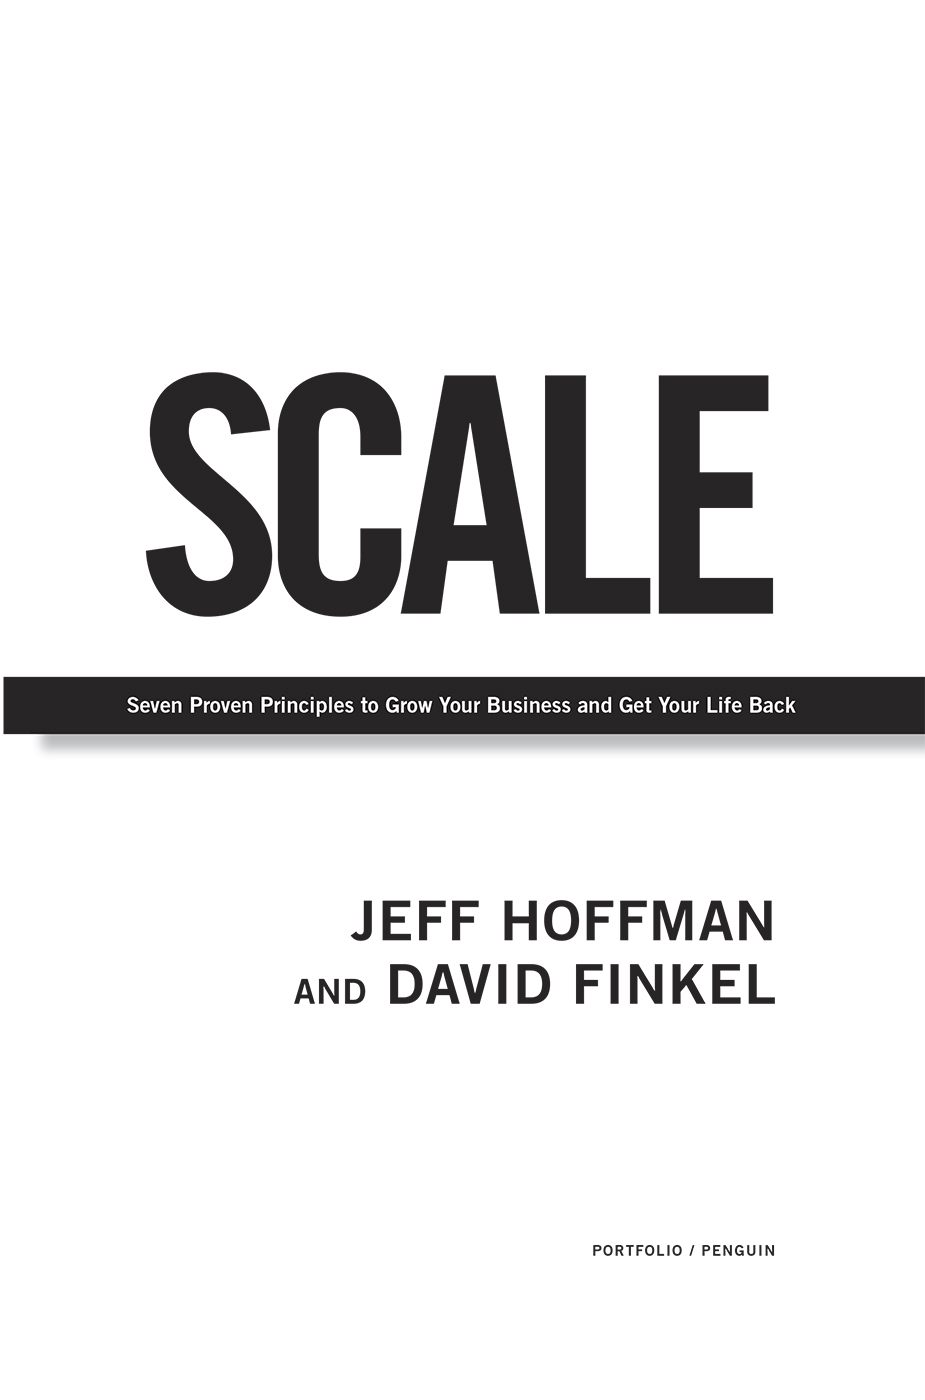 Scale seven proven principles to grow your business and get your life back - image 2